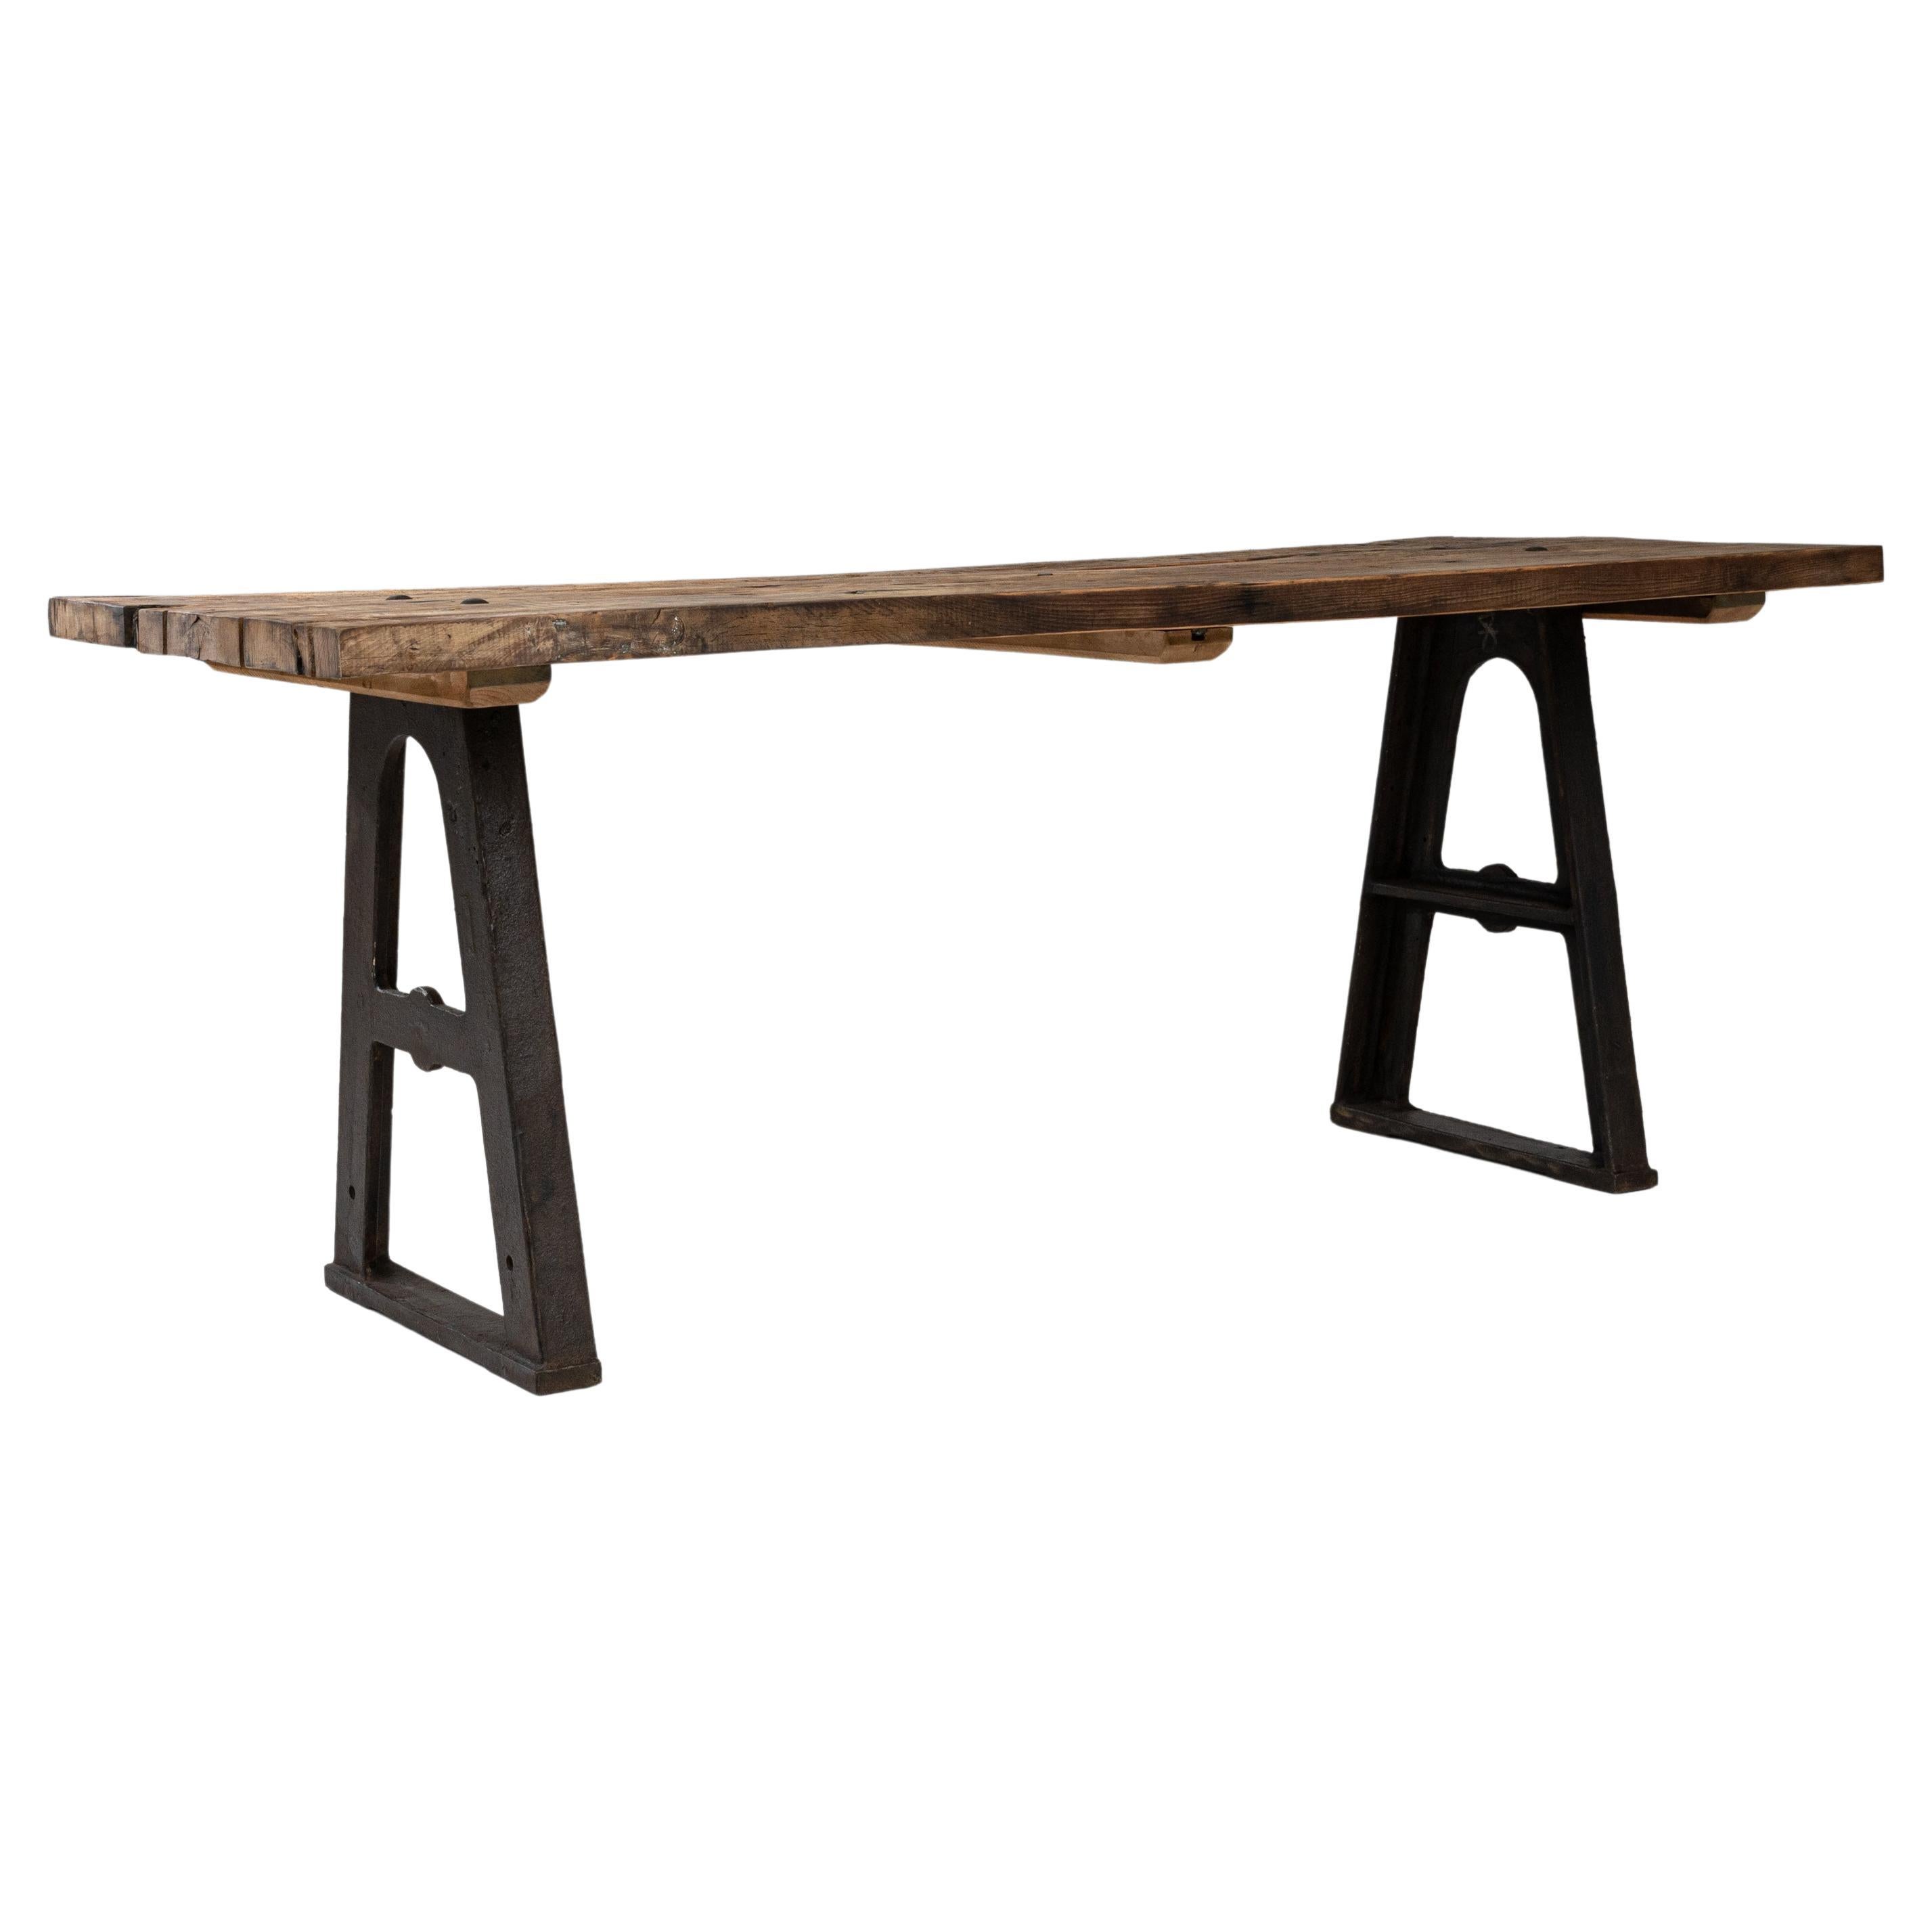 Early 20th Century French Industrial Table